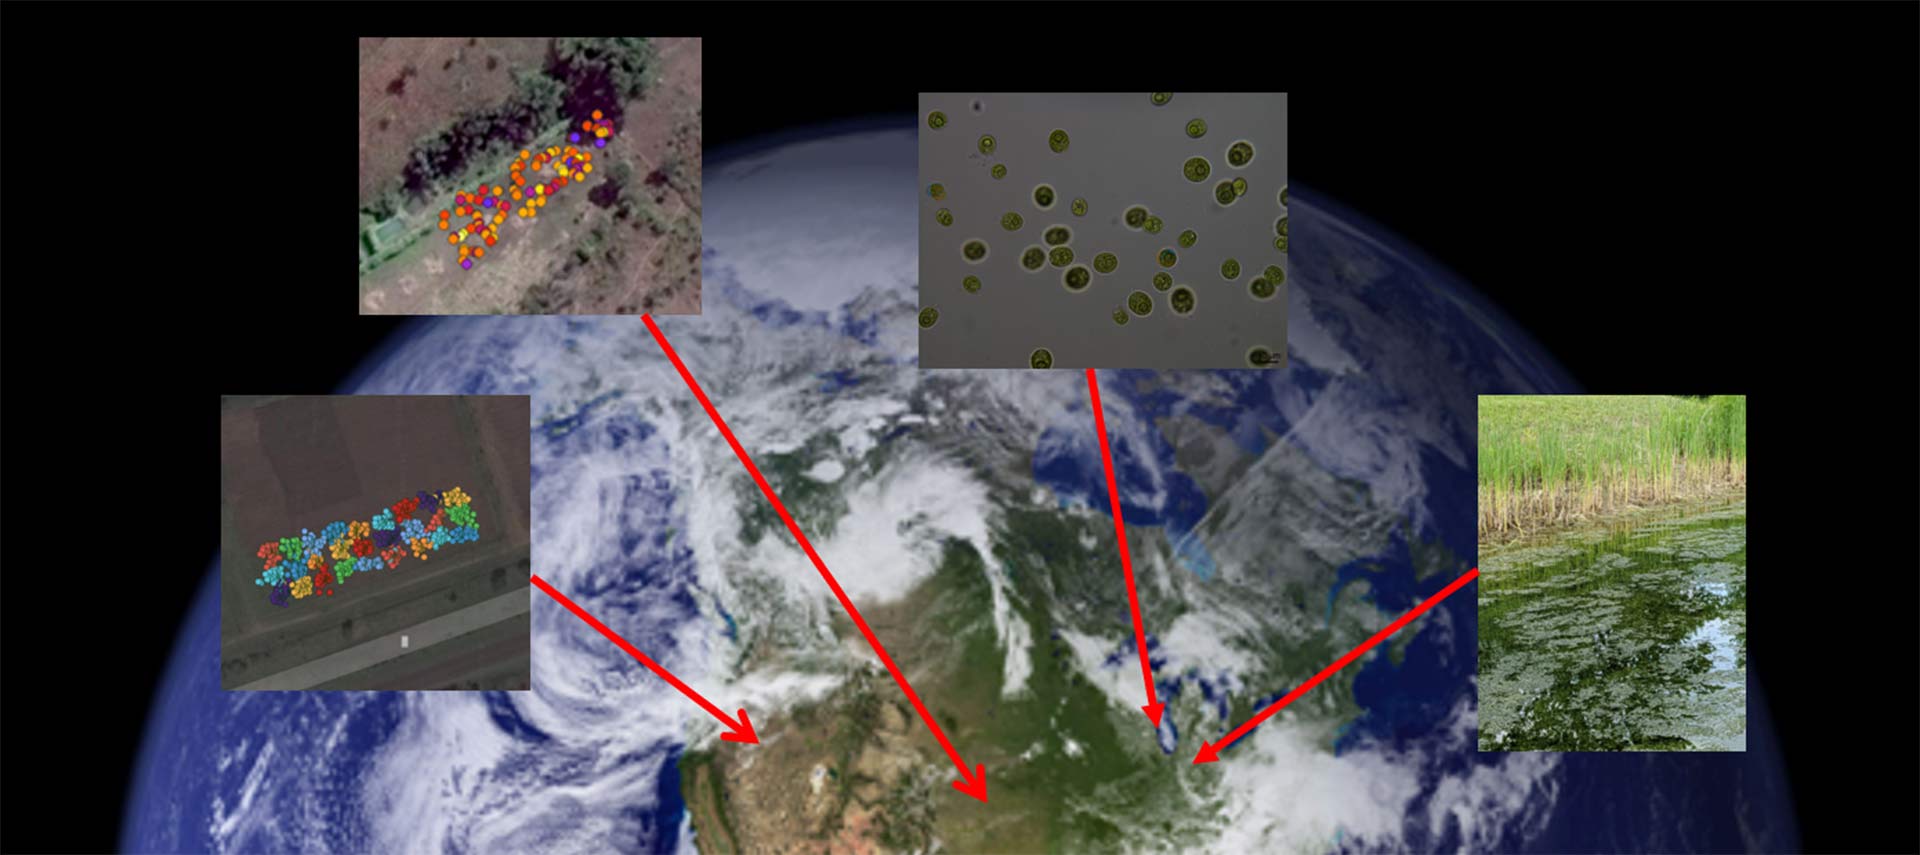 Earth seen from space. Four images of algae show with arrows pointing to different points of land.